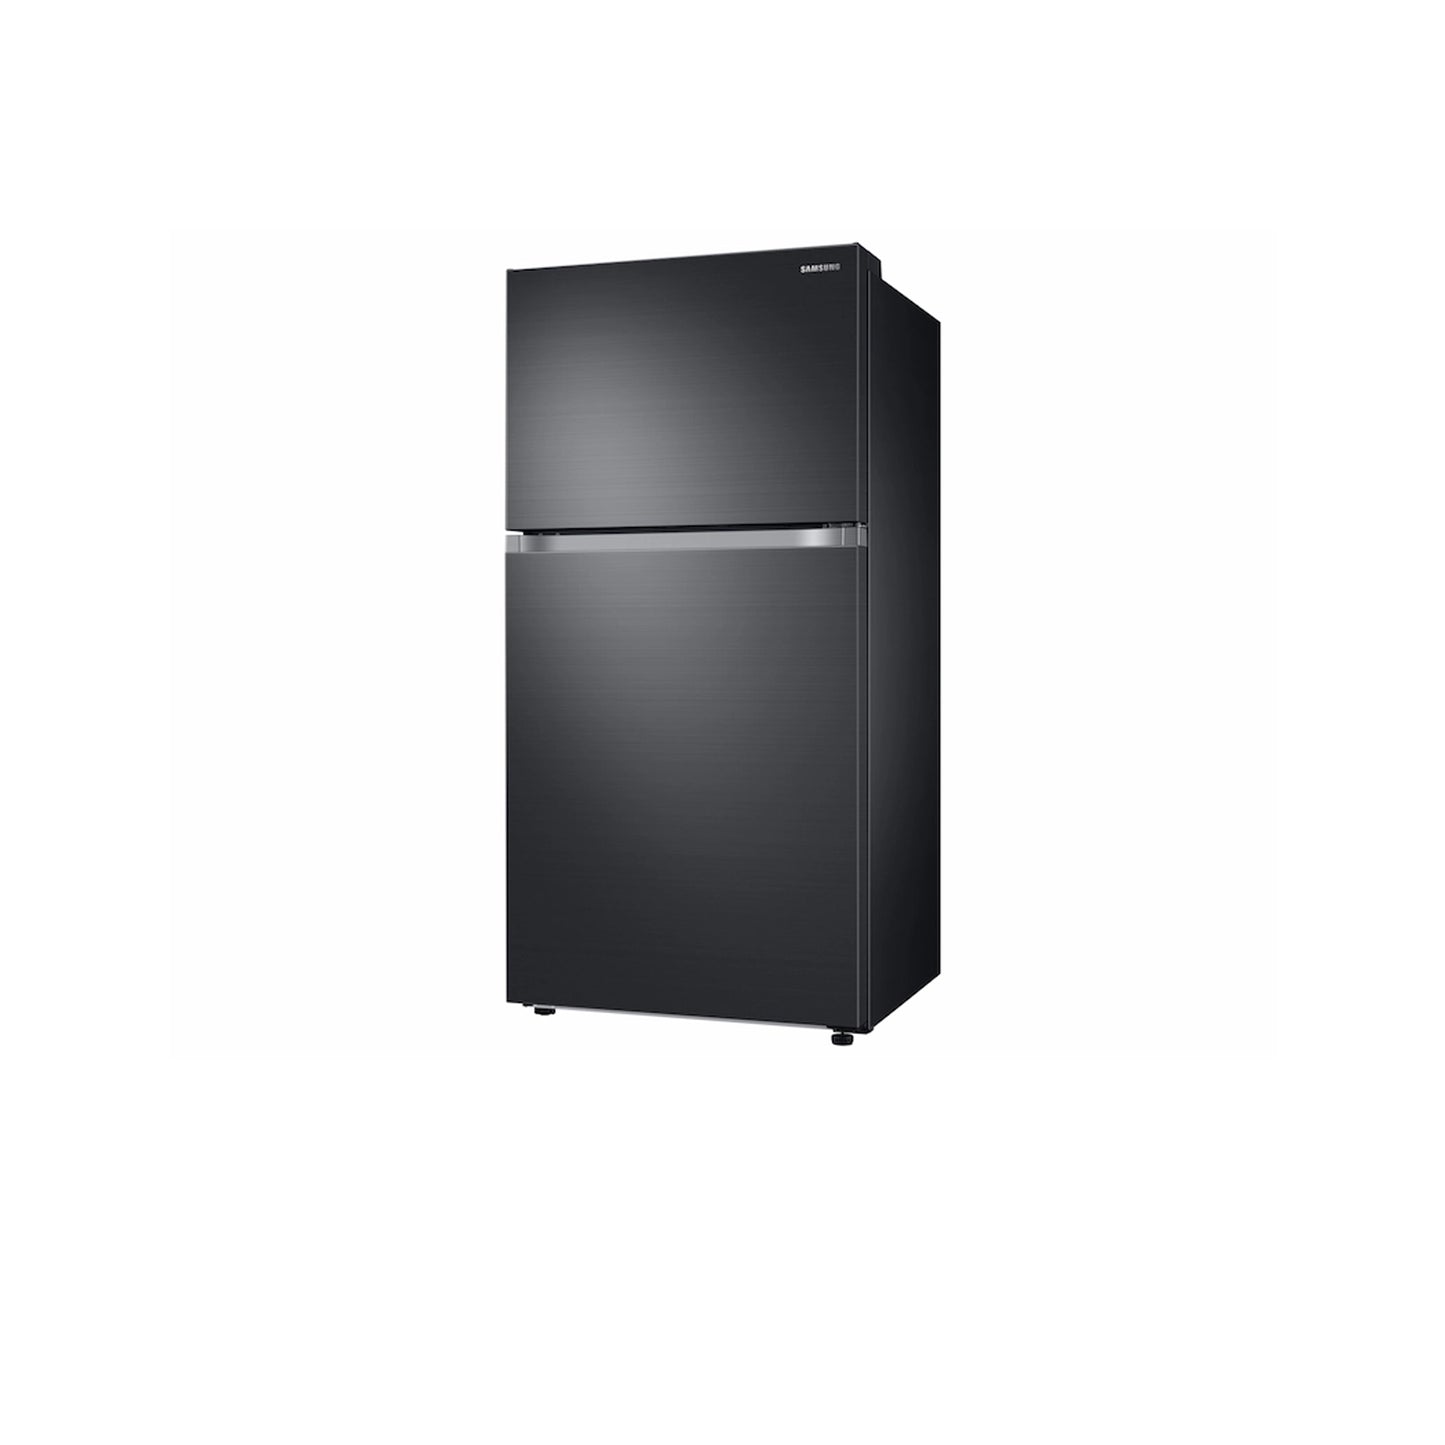 21 cu. ft. Top Freezer Refrigerator with FlexZone™ and Ice Maker in Stainless Steel